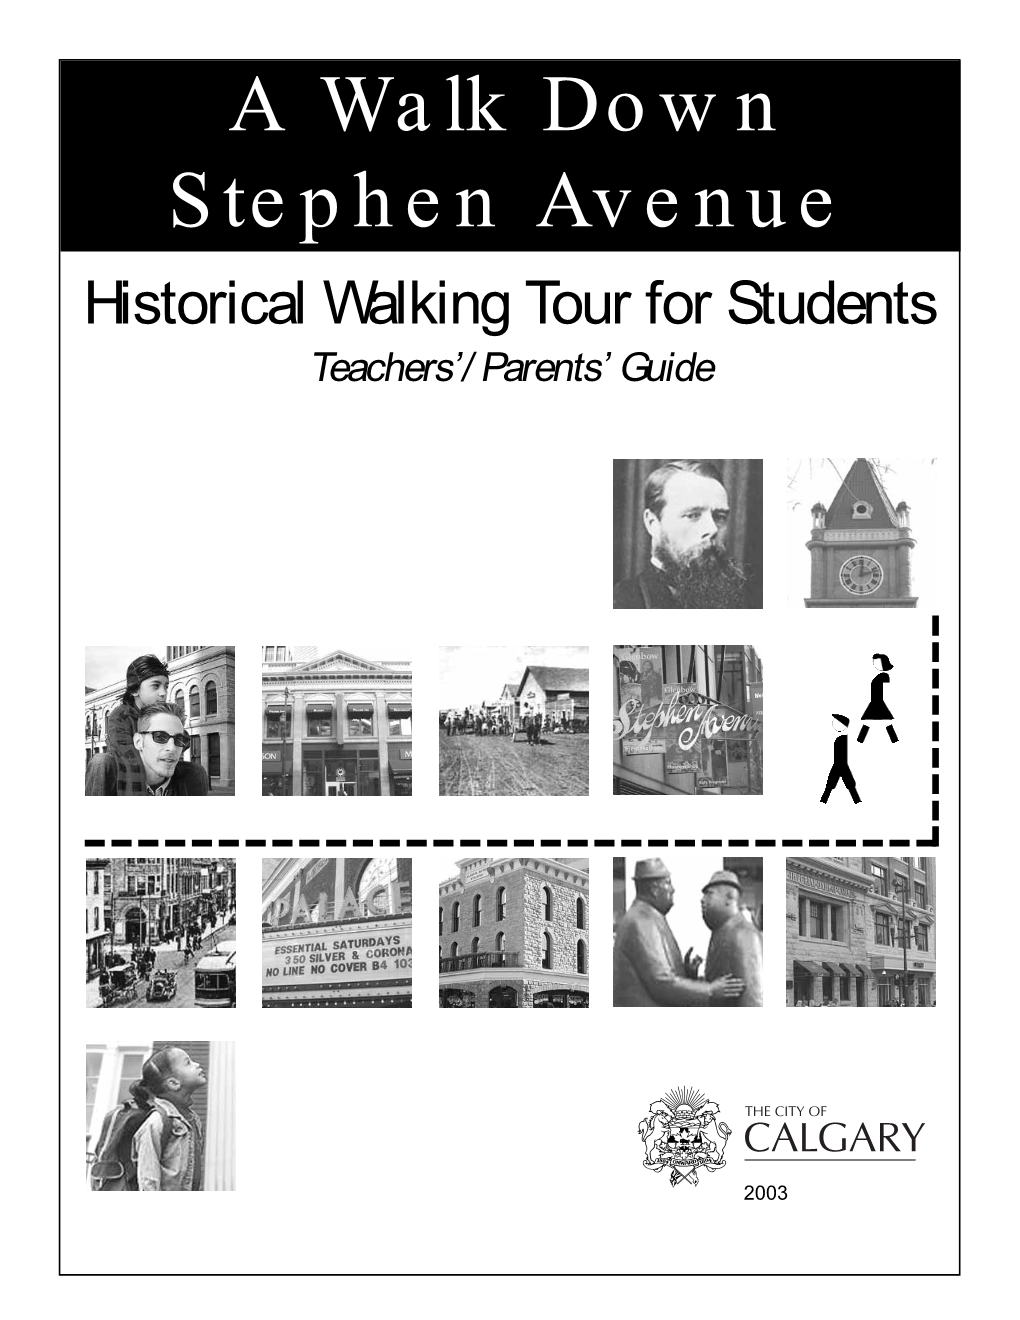 A Walk Down Stephen Avenue: Historical Walking Tour for Students